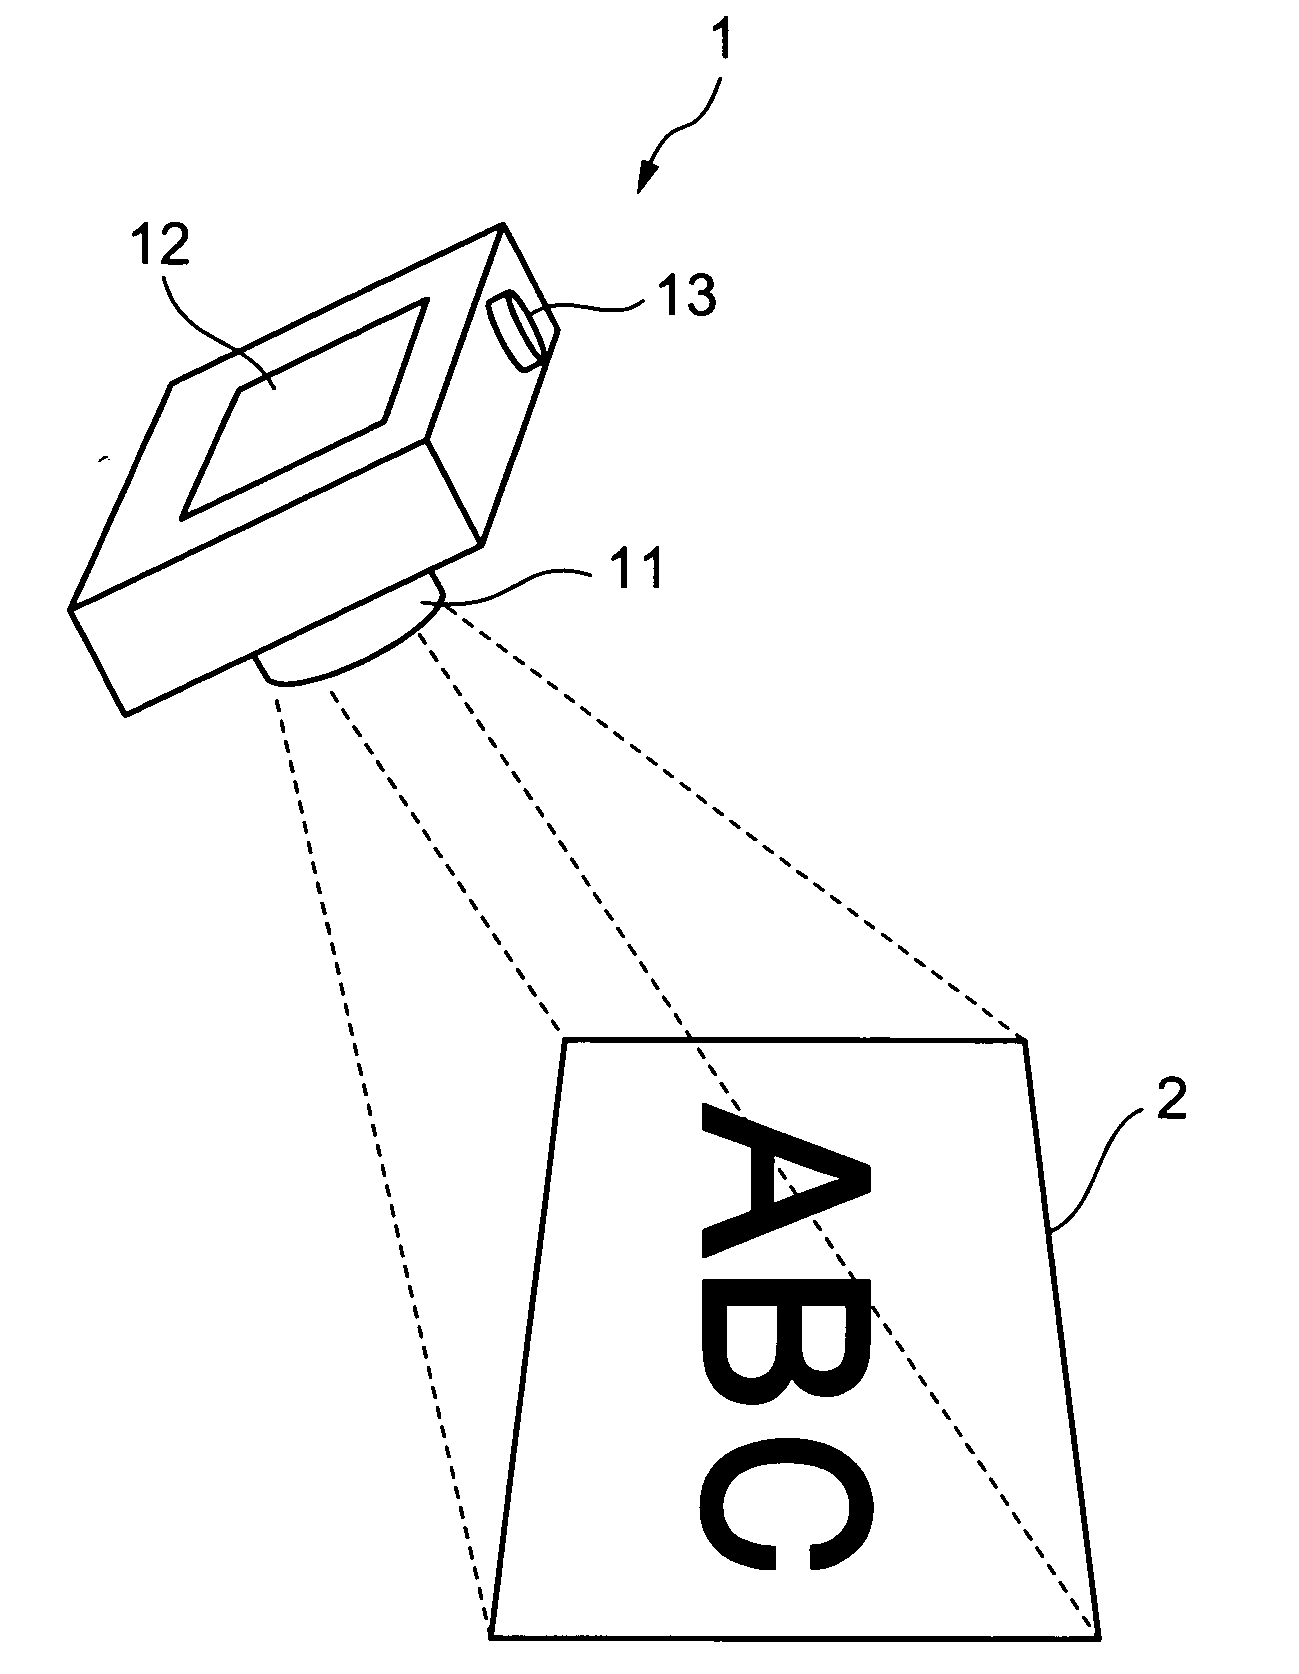 Image processing apparatus for correcting distortion of image and image shooting apparatus for correcting distortion of shot image